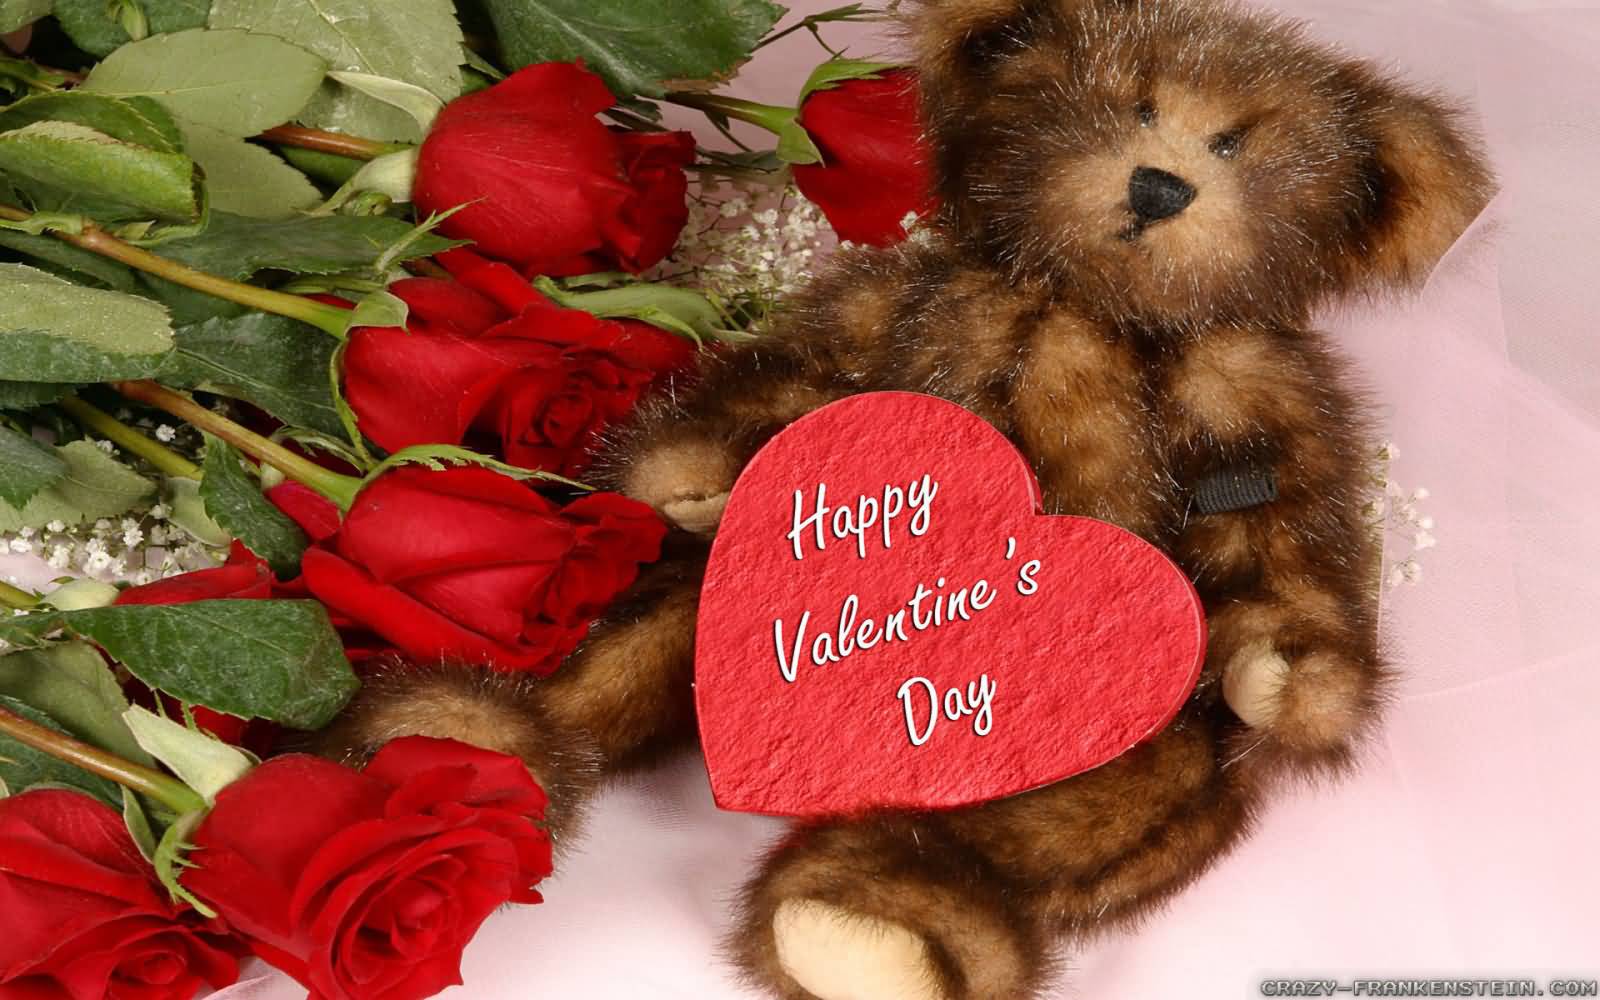 Happy Valentine’s Day 2017 Teddy Bear And Rose Flowers